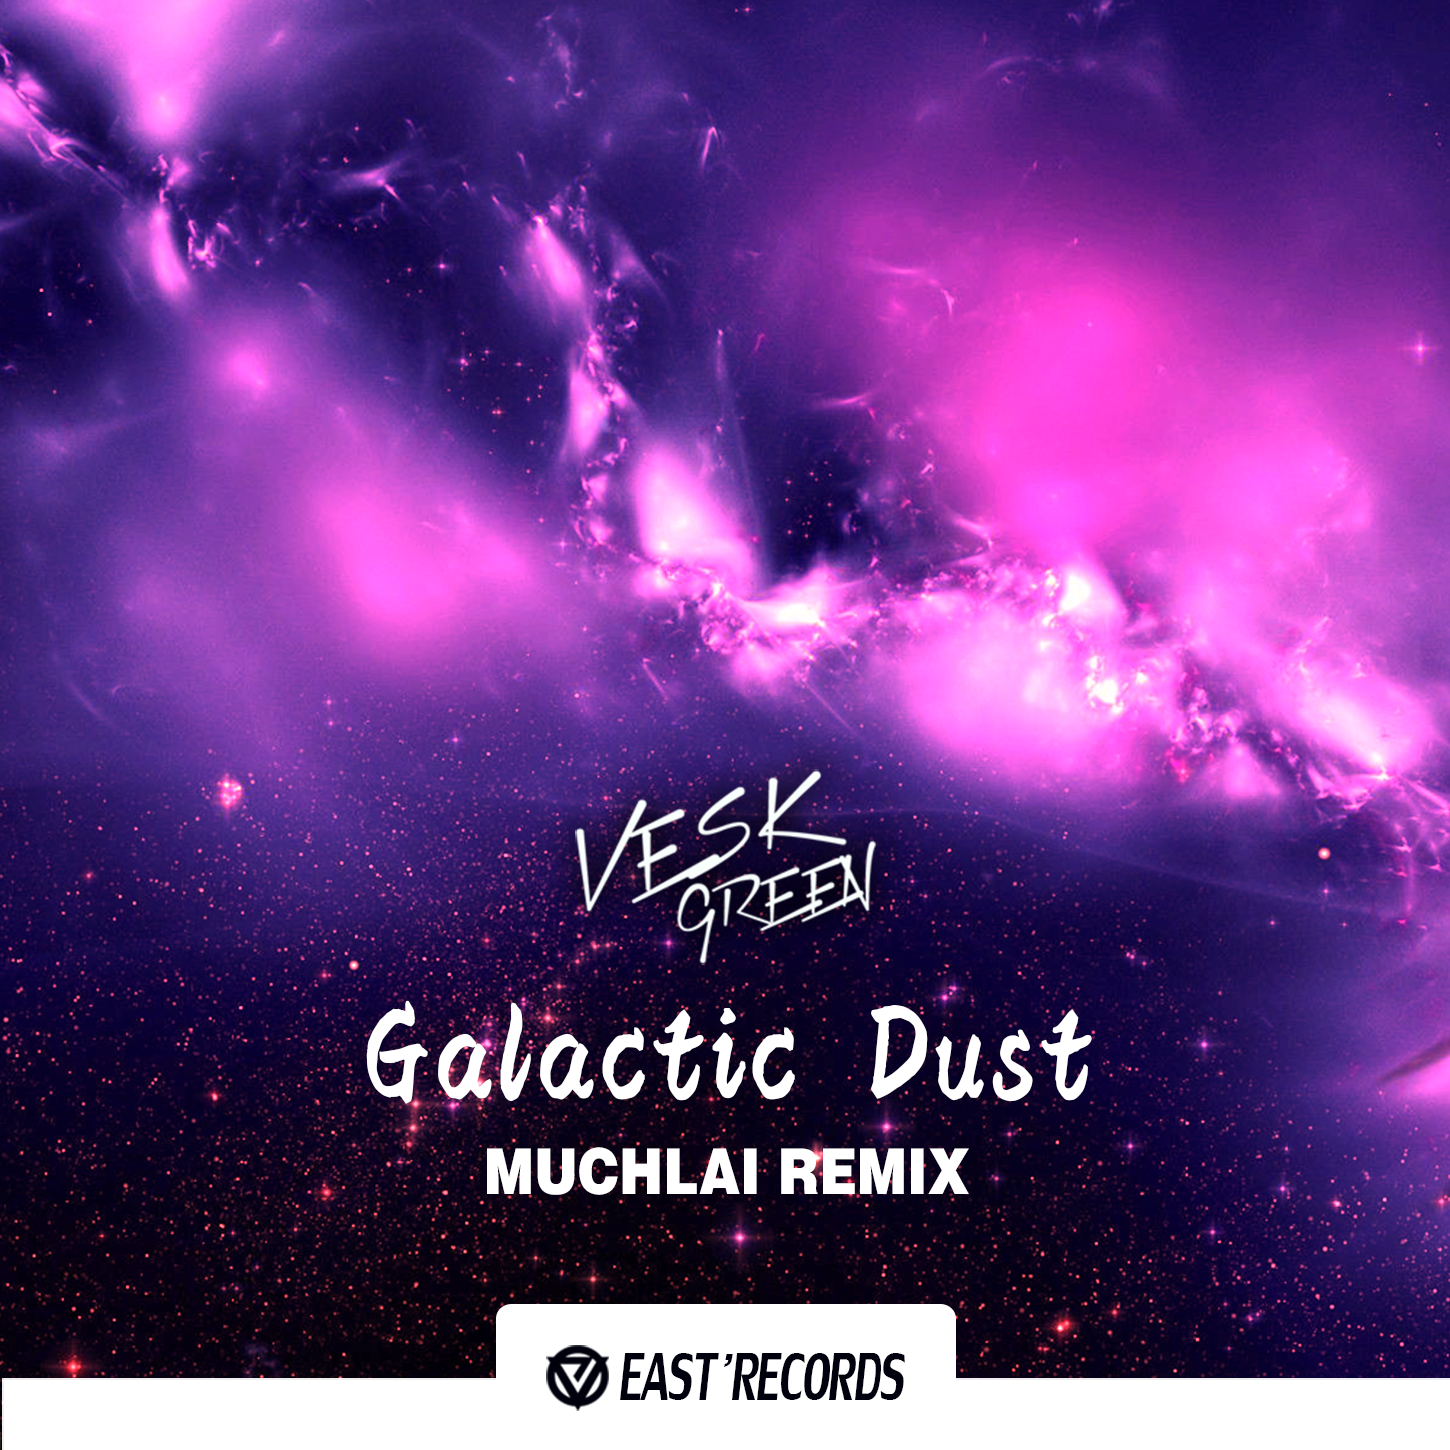 Galactic  dust muchlai  remix